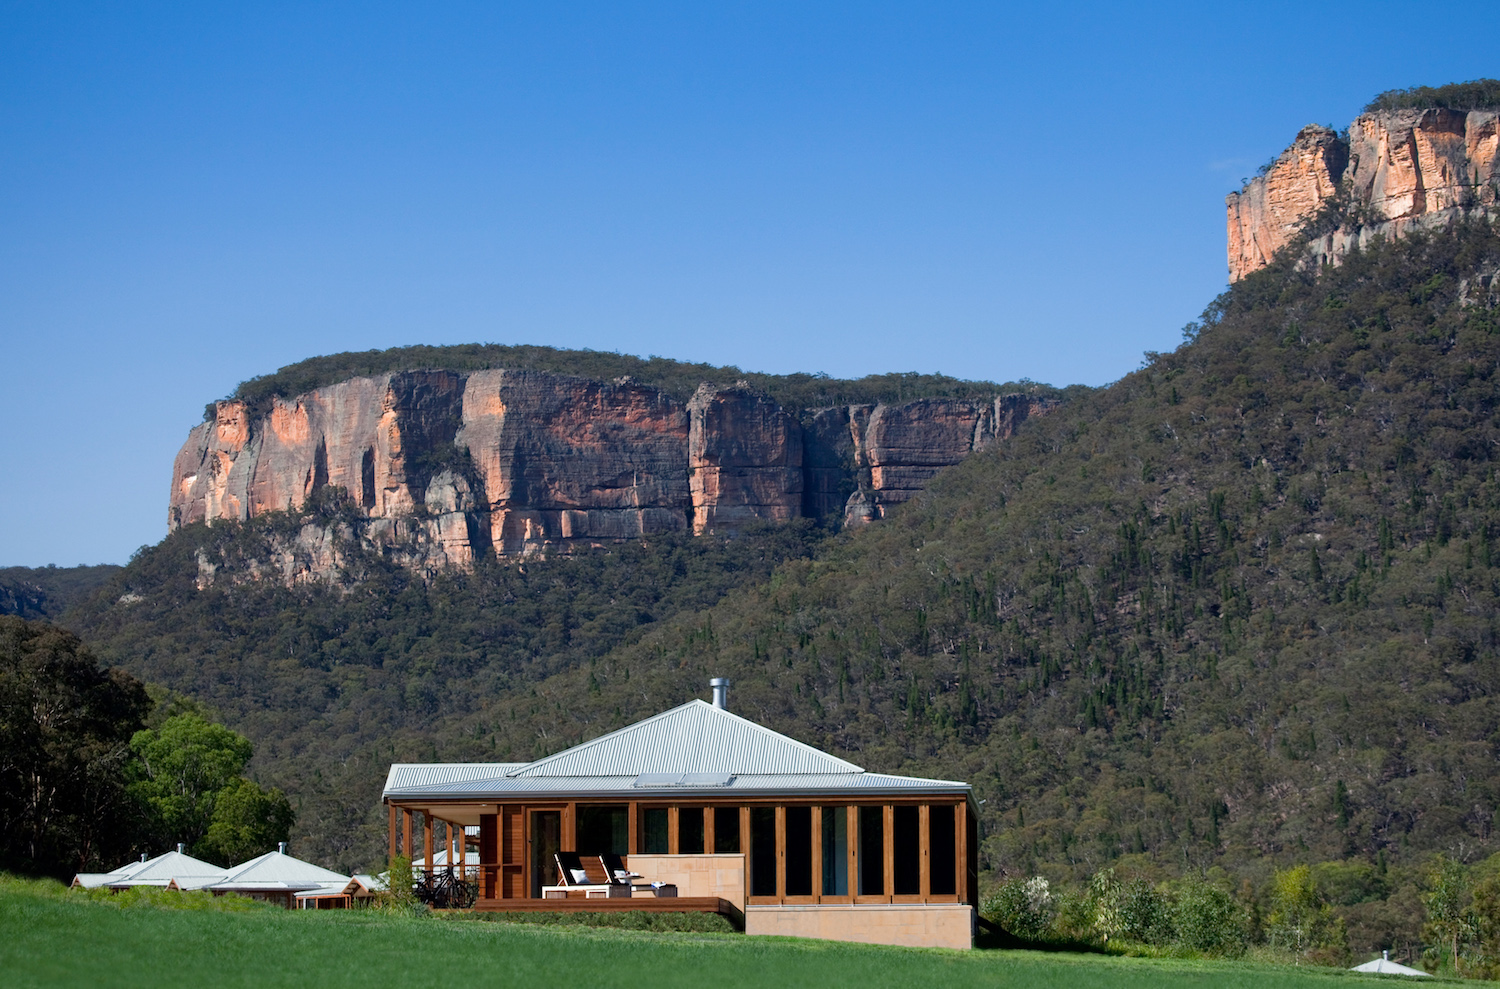 Emirates One&Only Wolgan Valley in the Blue Mountains